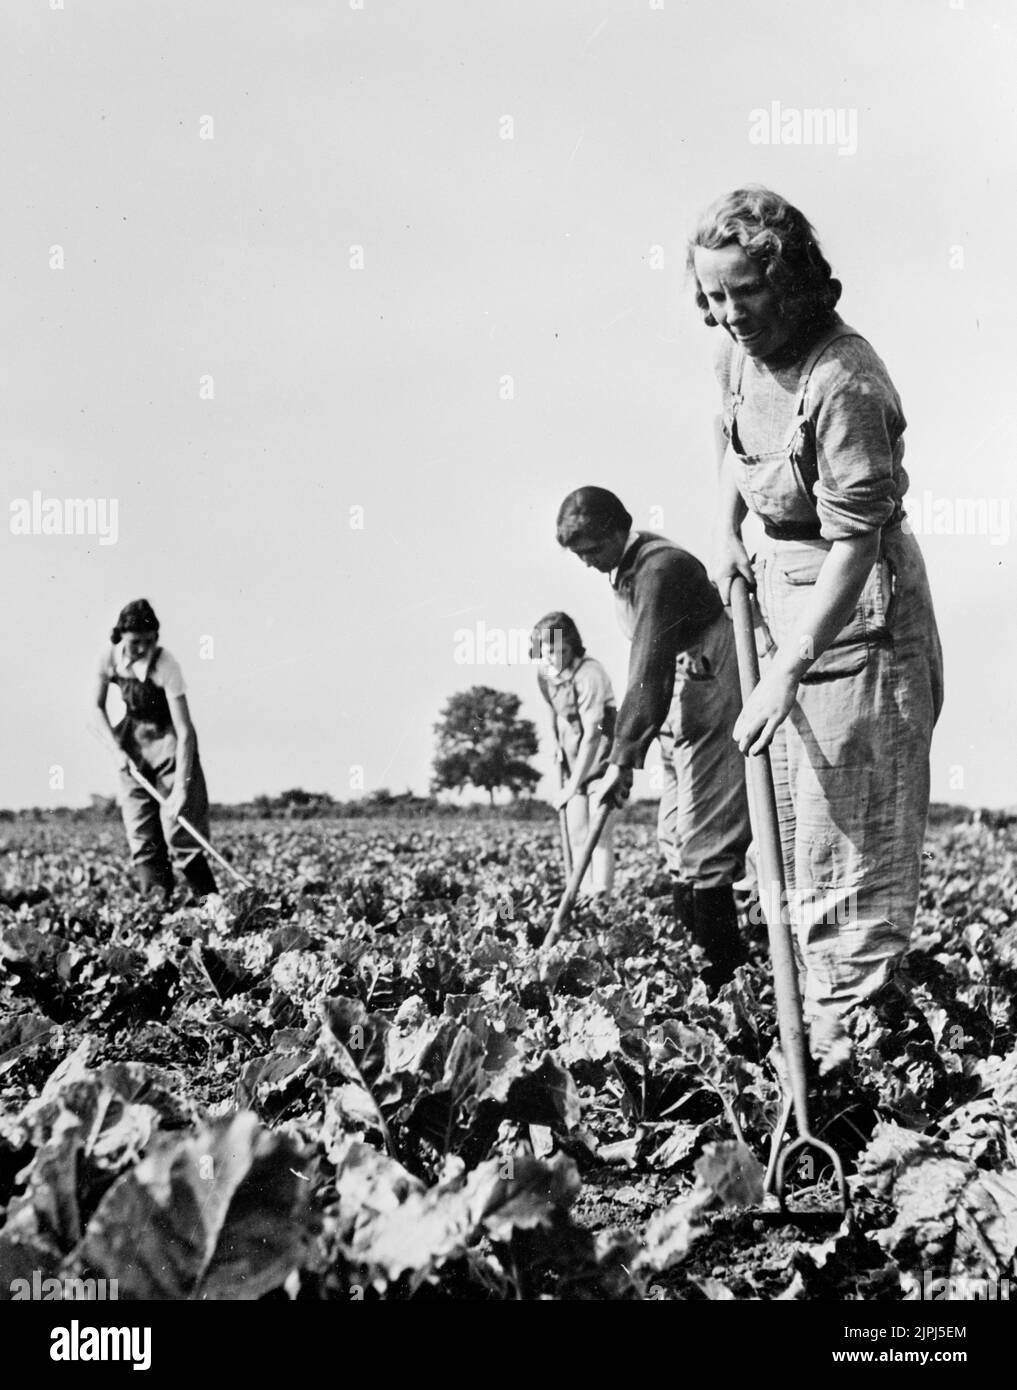 Women working in fields producing crops during wartime. 1943 Women's Land Army (WLA) made a significant contribution to boosting Britain's food production during the Second World War. Stock Photo